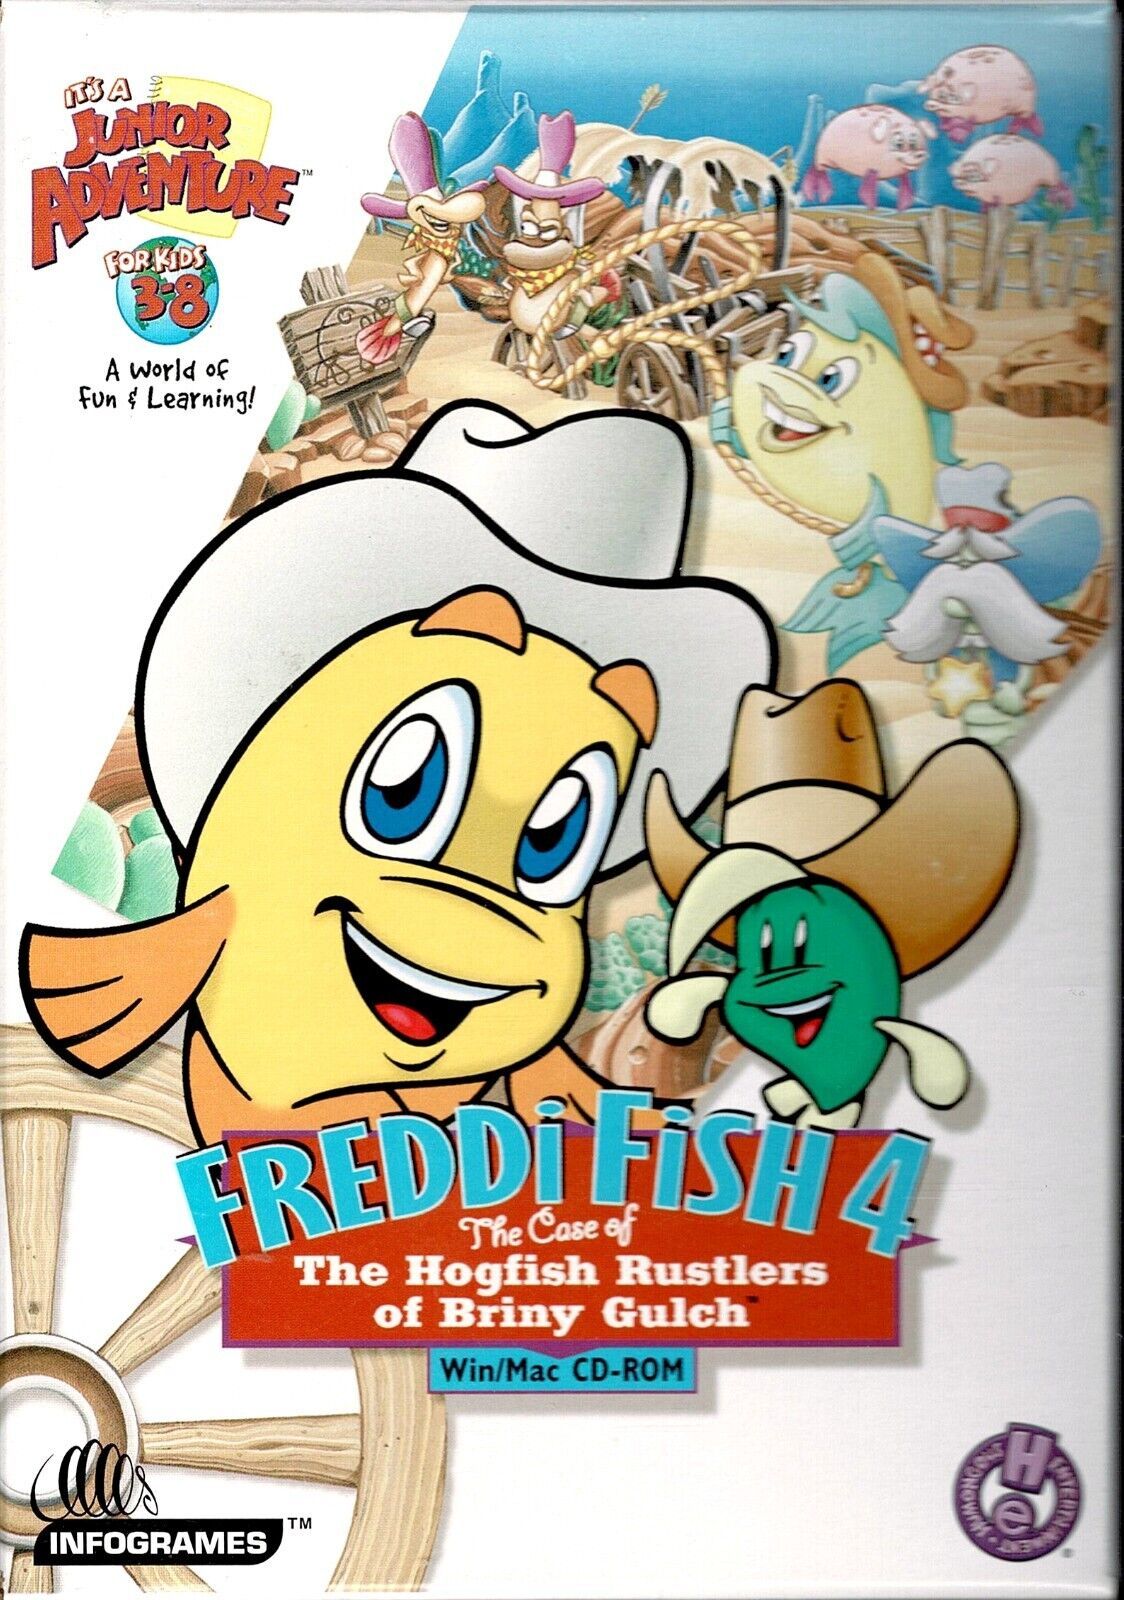 Freddi Fish 4: The Case of the Hogfish Rustlers of Briny Gulch Video Game